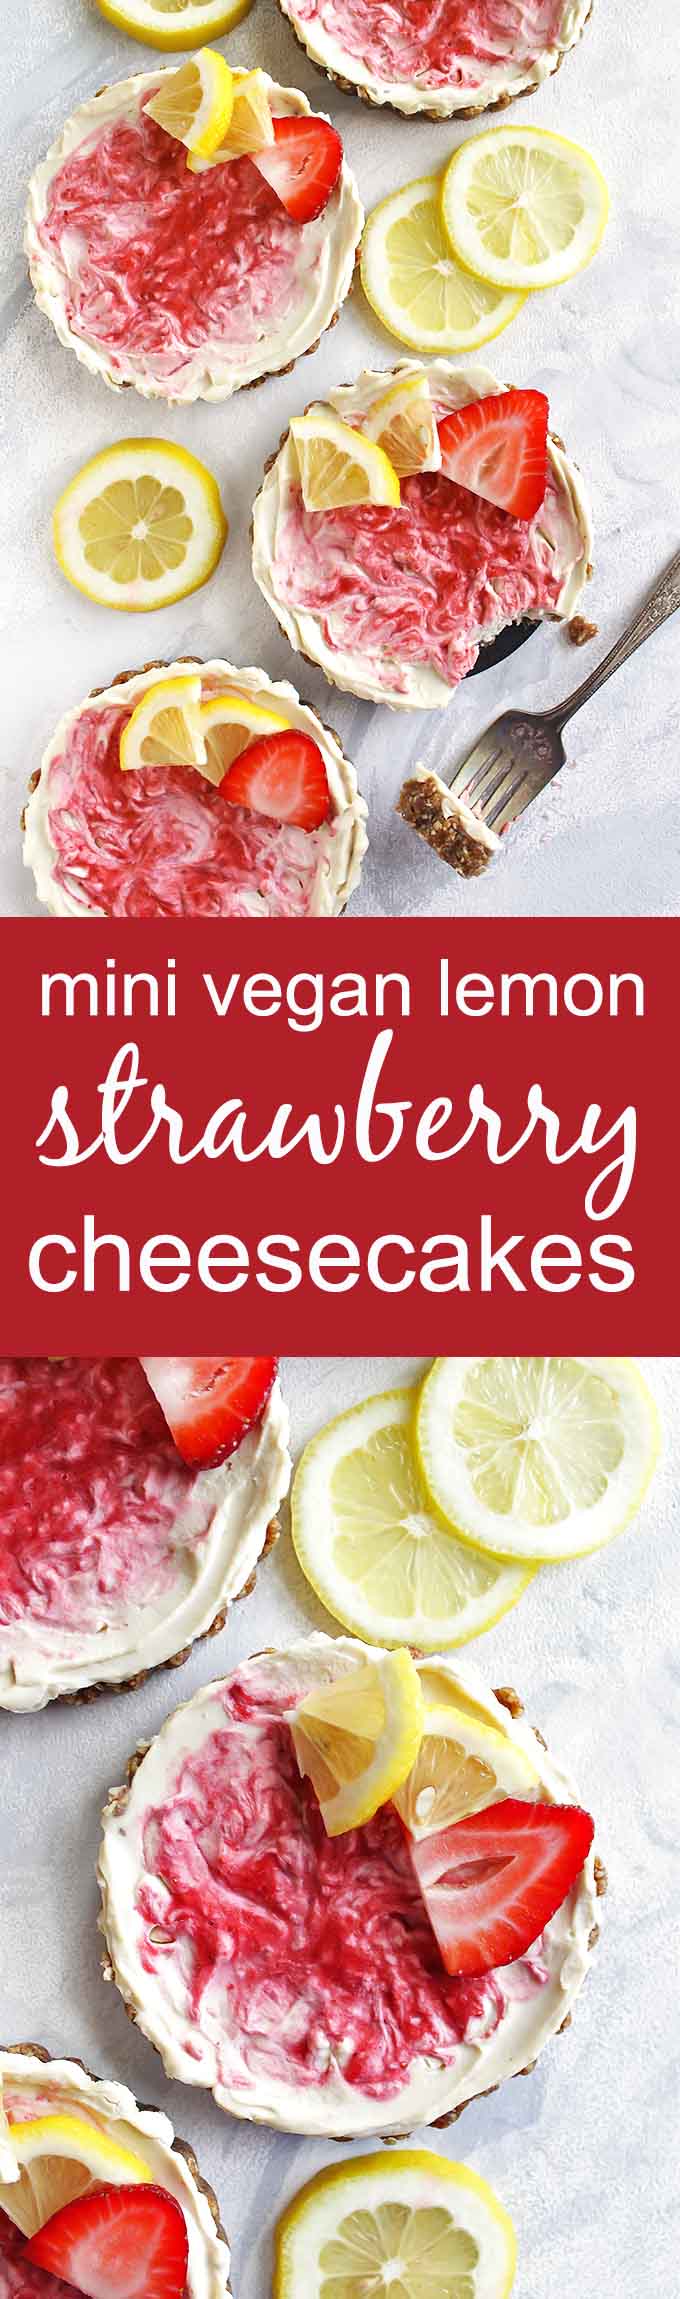 Mini Vegan Lemon Strawberry Cheesecakes - These mini cheesecakes are perfect for parties or celebrations. Or keep them on hand, in the freezer for any time you have a craving. This is a no bake recipe. The crust is a date/pecan crust and the filling is lemon-y with a strawberry swirl. Gluten Free/ Vegan/ Refined Sugar Free/ Dairy Free | robustrecipes.com